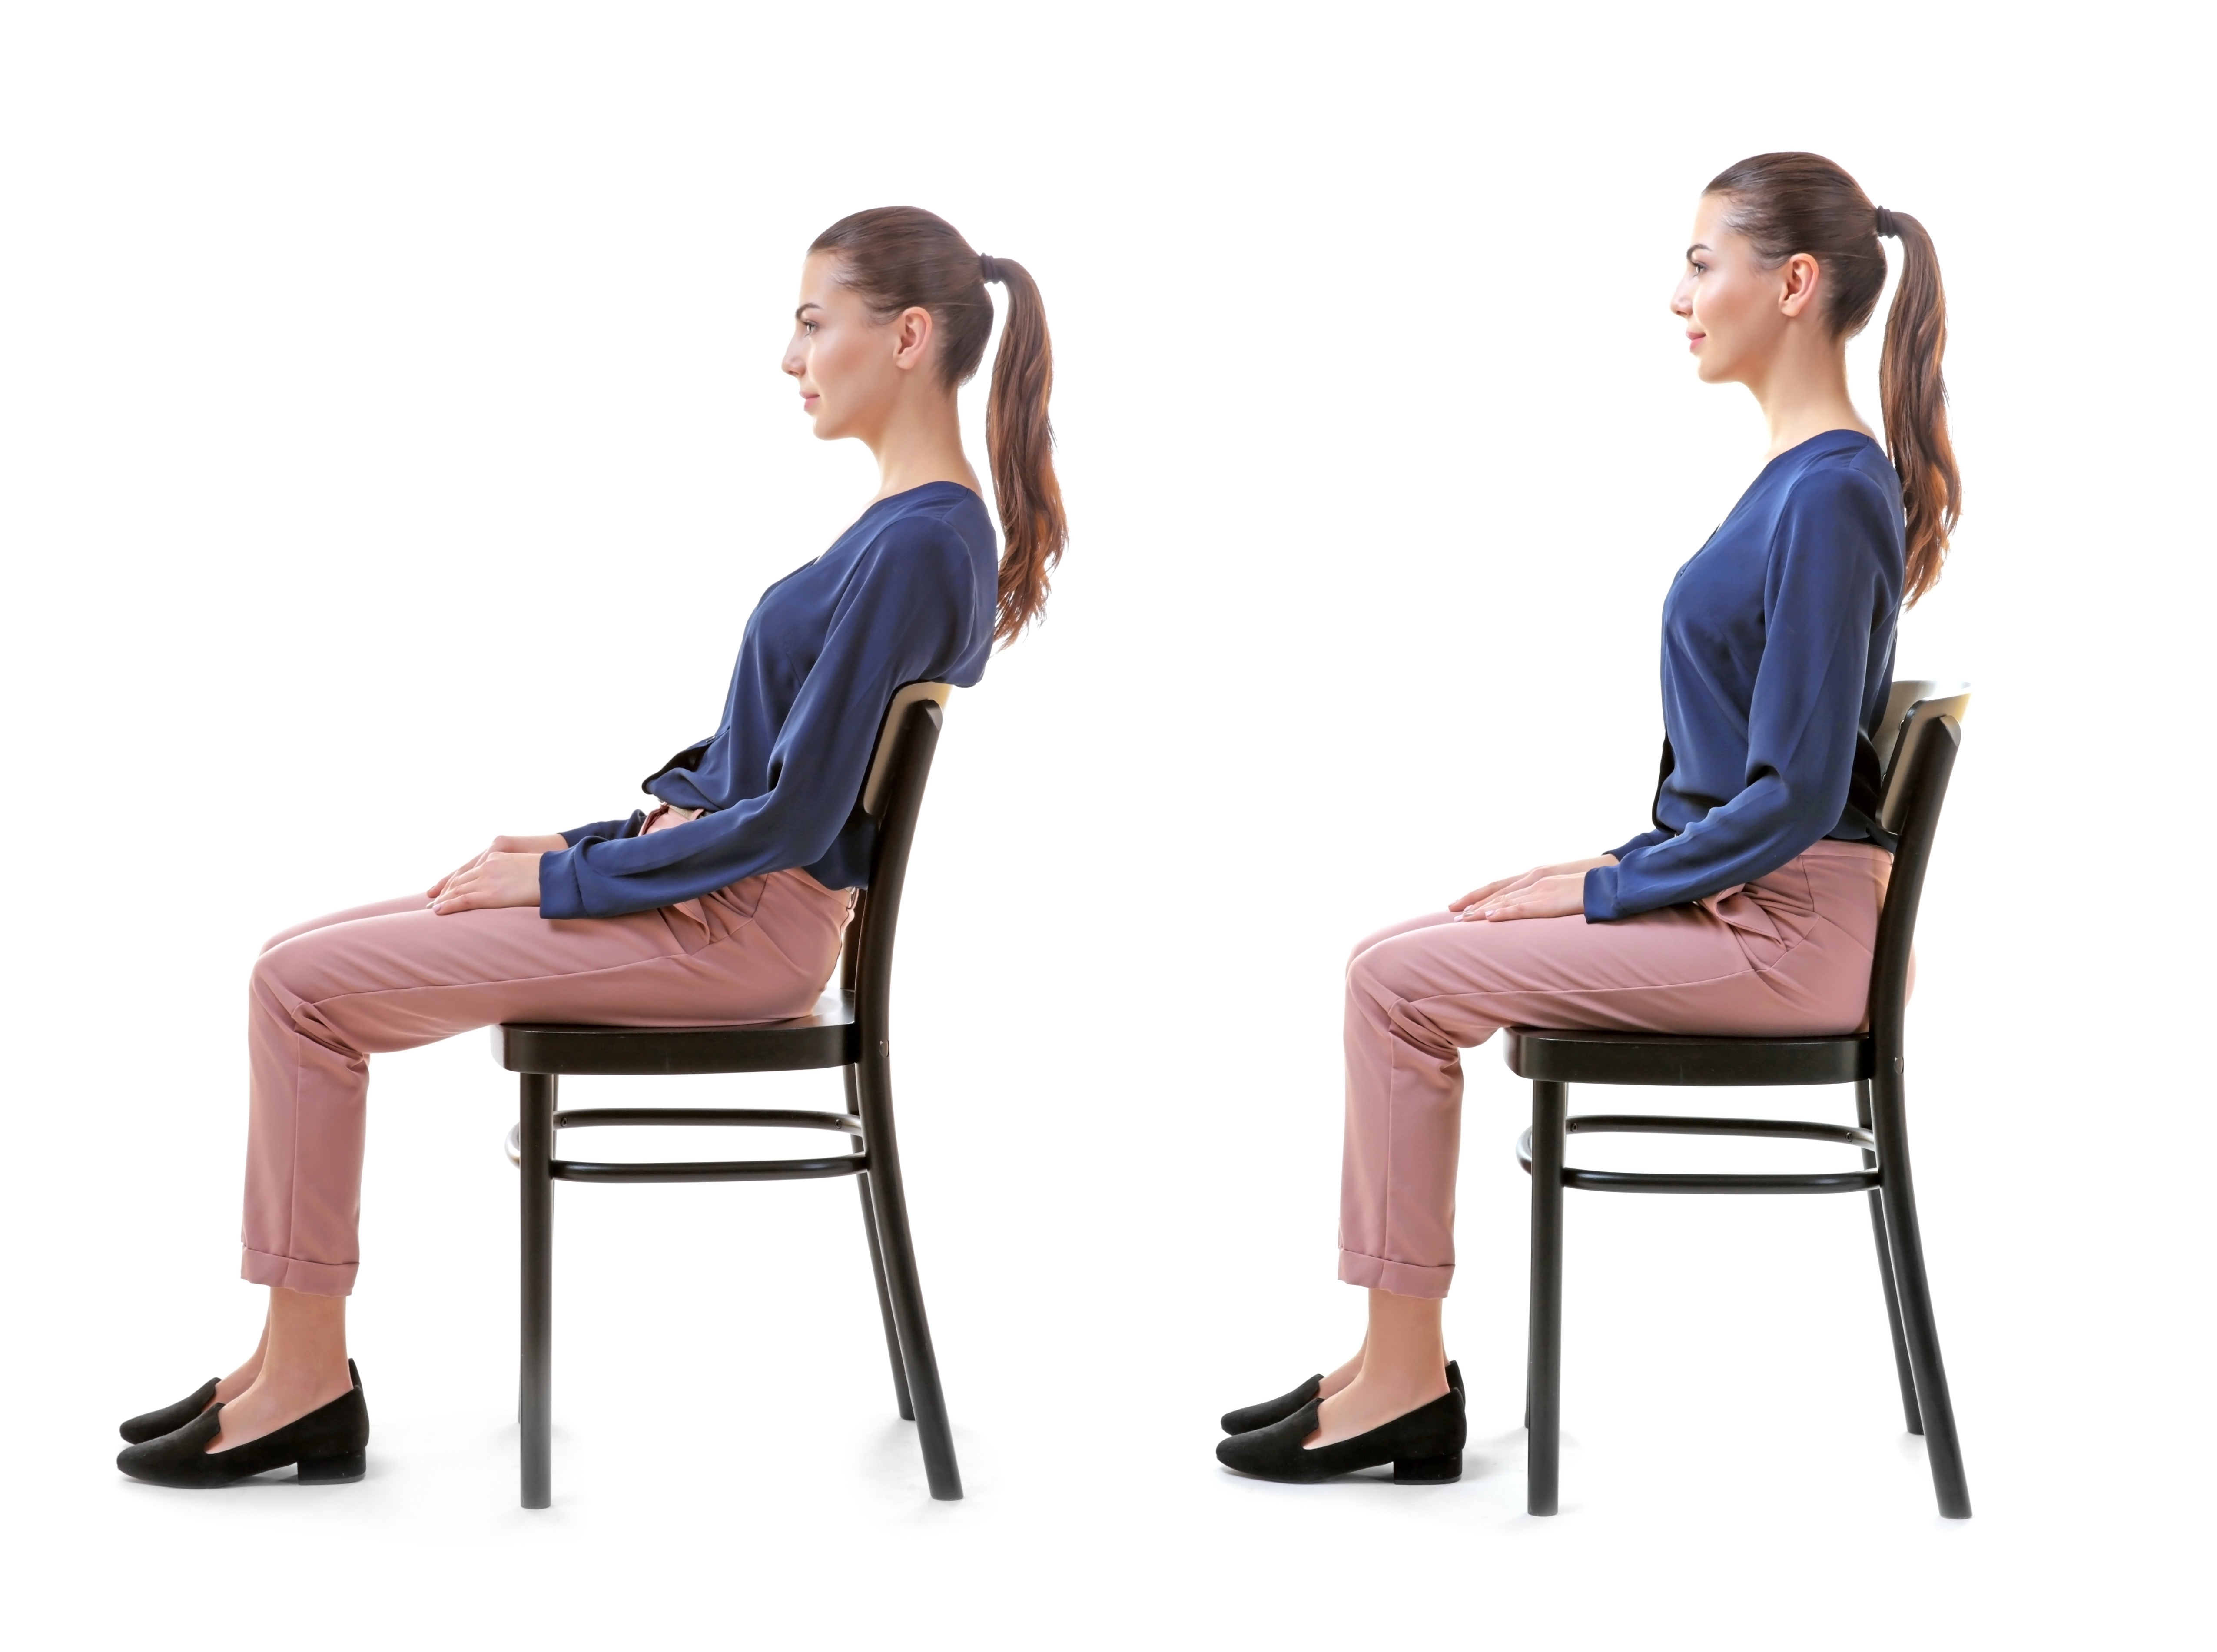 Slouched Sitting Makes You Sick: Proper Posture Keeps You Healthy